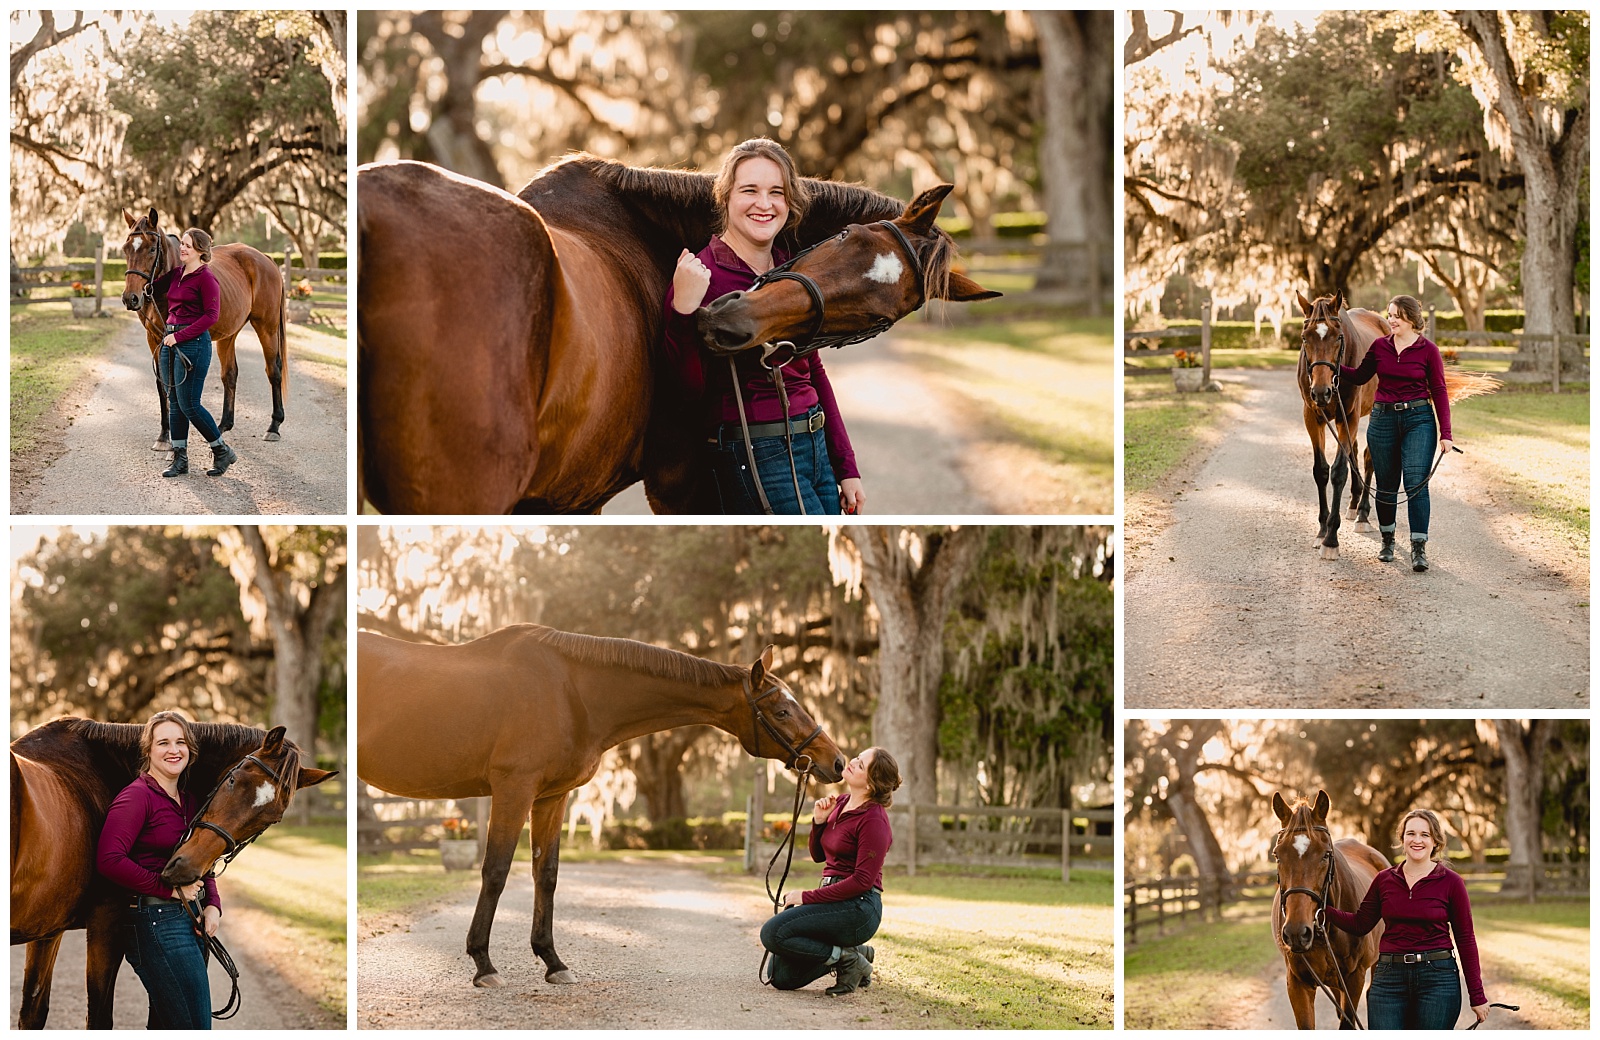 Sunset horse and rider photos near Tallahassee, Florida with Thoroughbred horse. Florida Equine Photographer